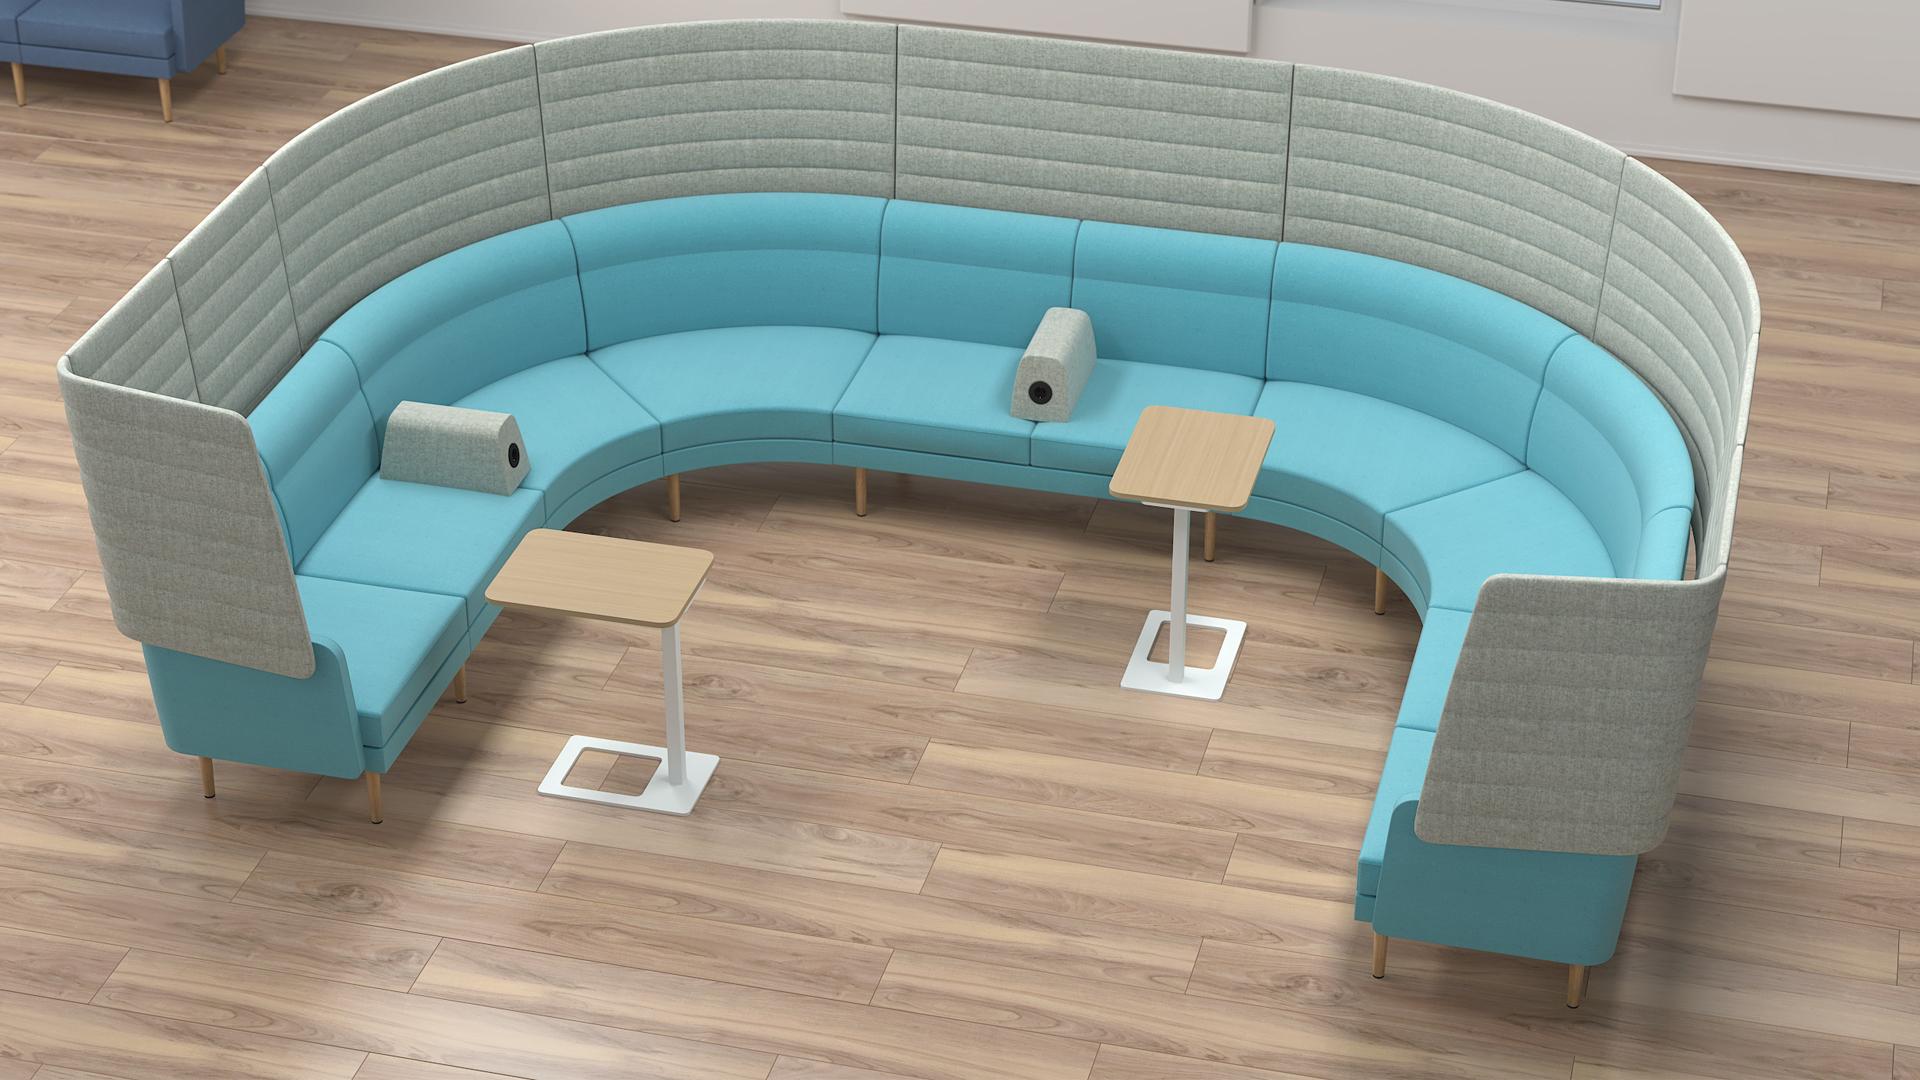 Arcipelago is a modular lounge seating system offering endless configuration possibilities.